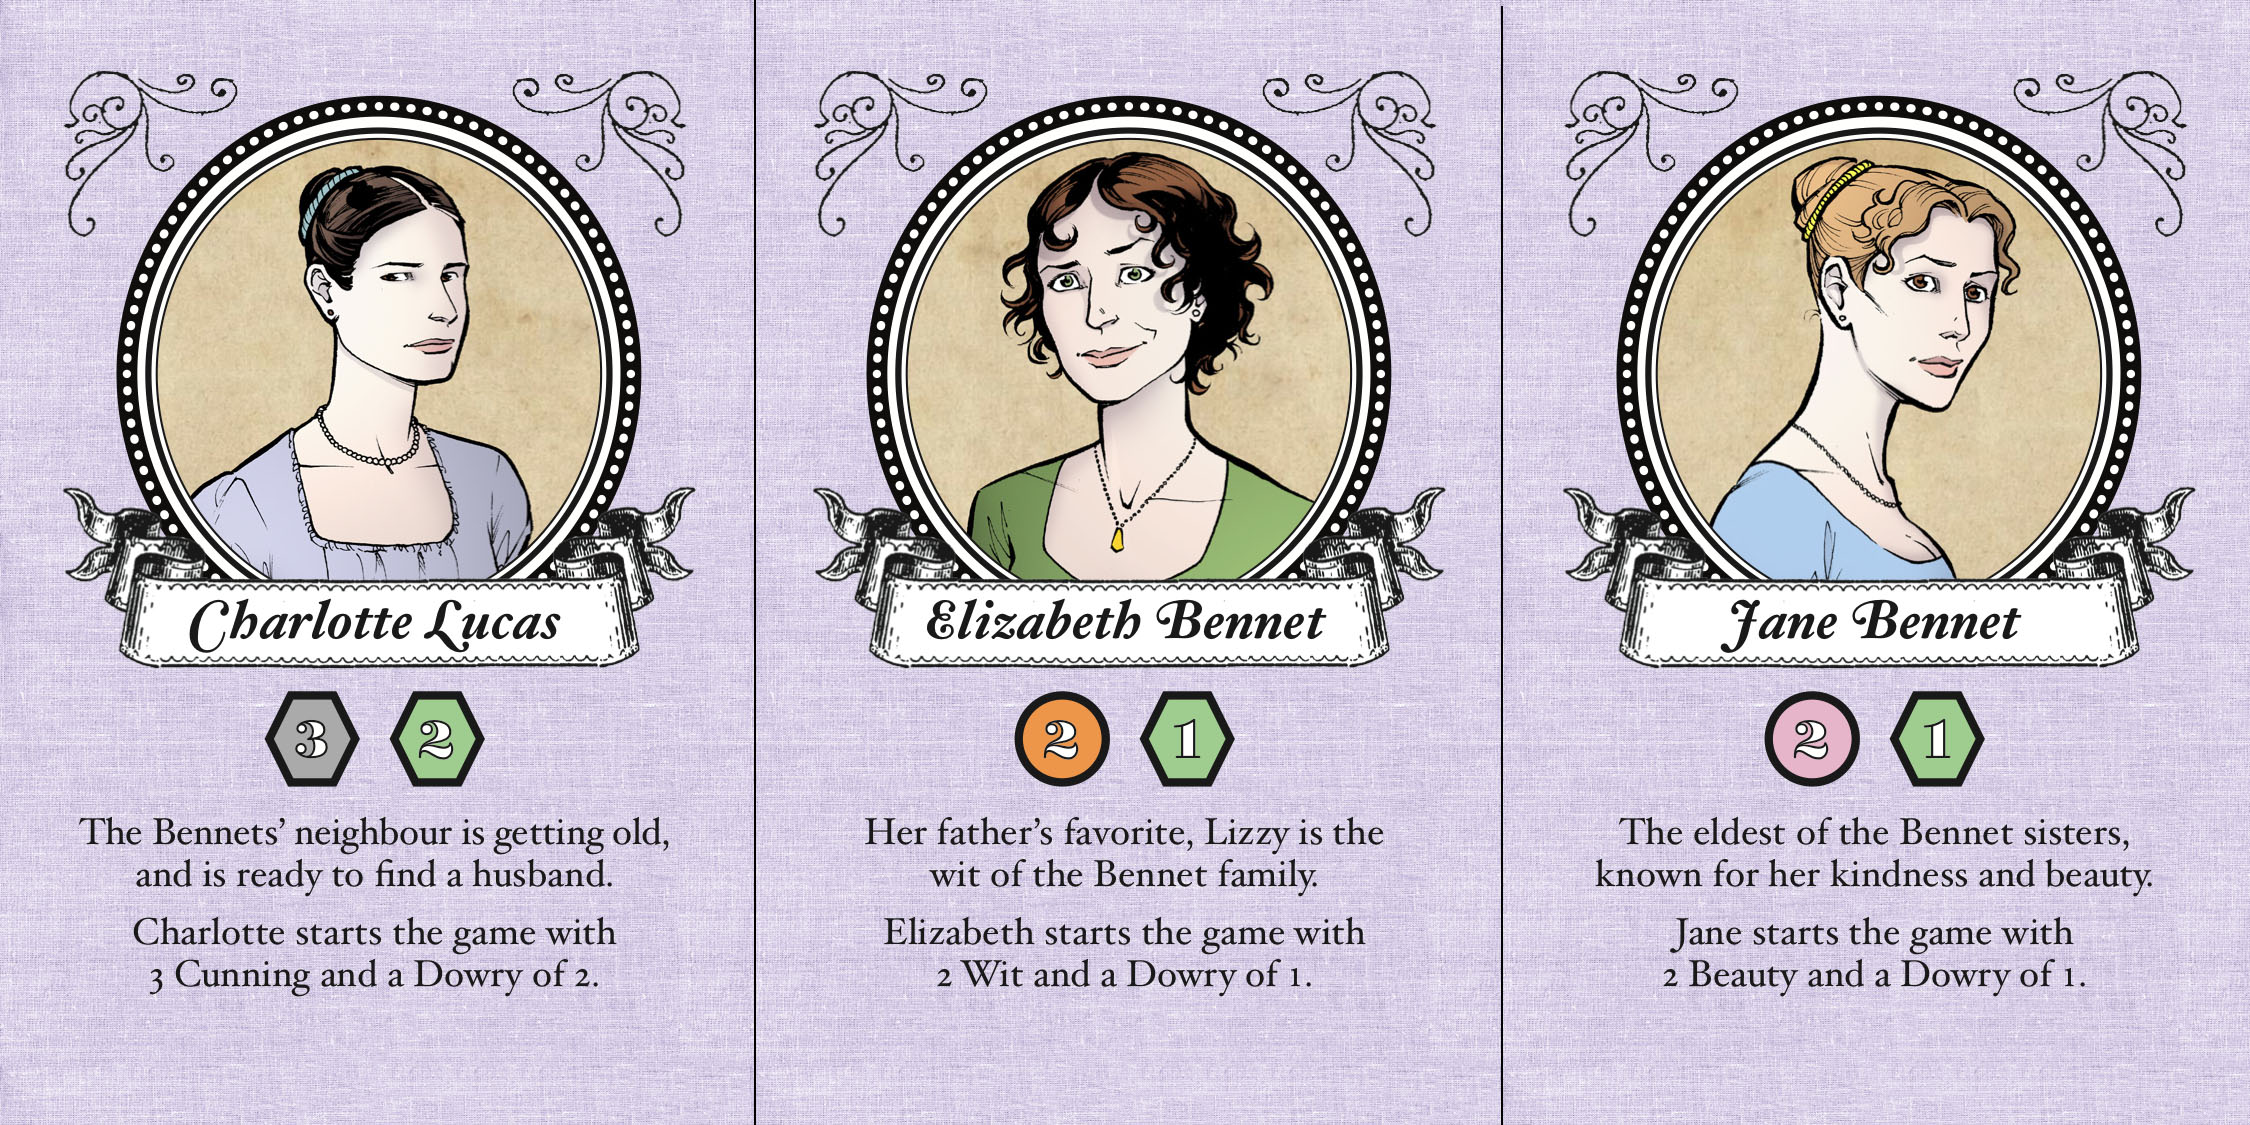 Marrying Mr Darcy- The Pride and Prejudice Board Game: inter